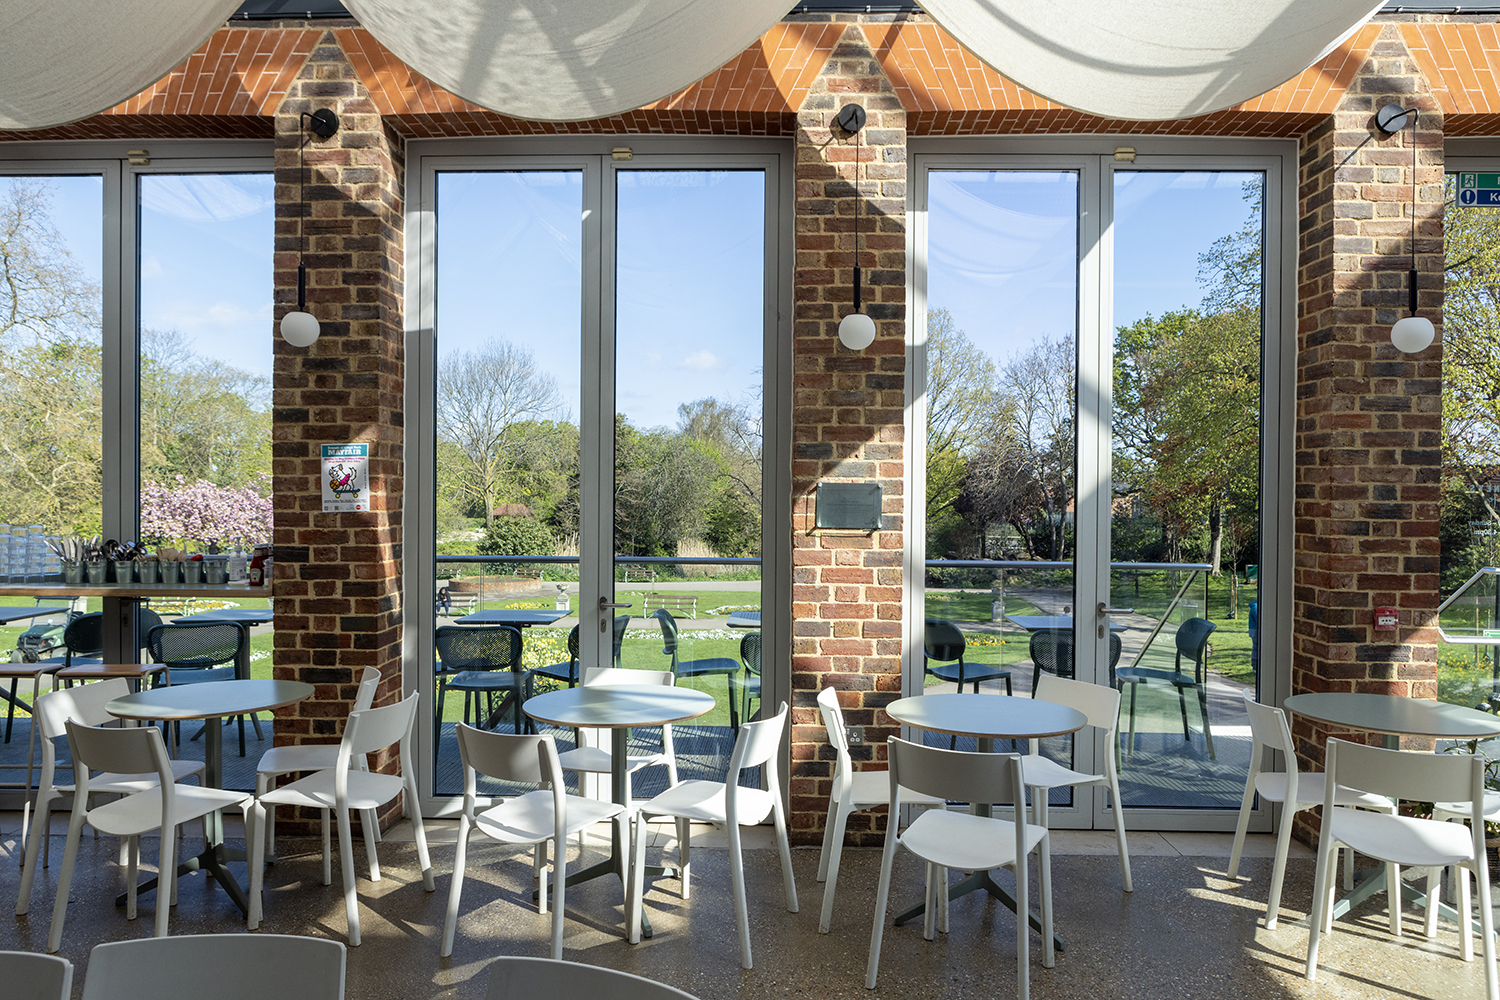 Image of the Cafe at William Morris Gallery on a sunny day. The sun is shining into the space from the ceiling and windows. We see tables, chairs and a counter to the left of the image.